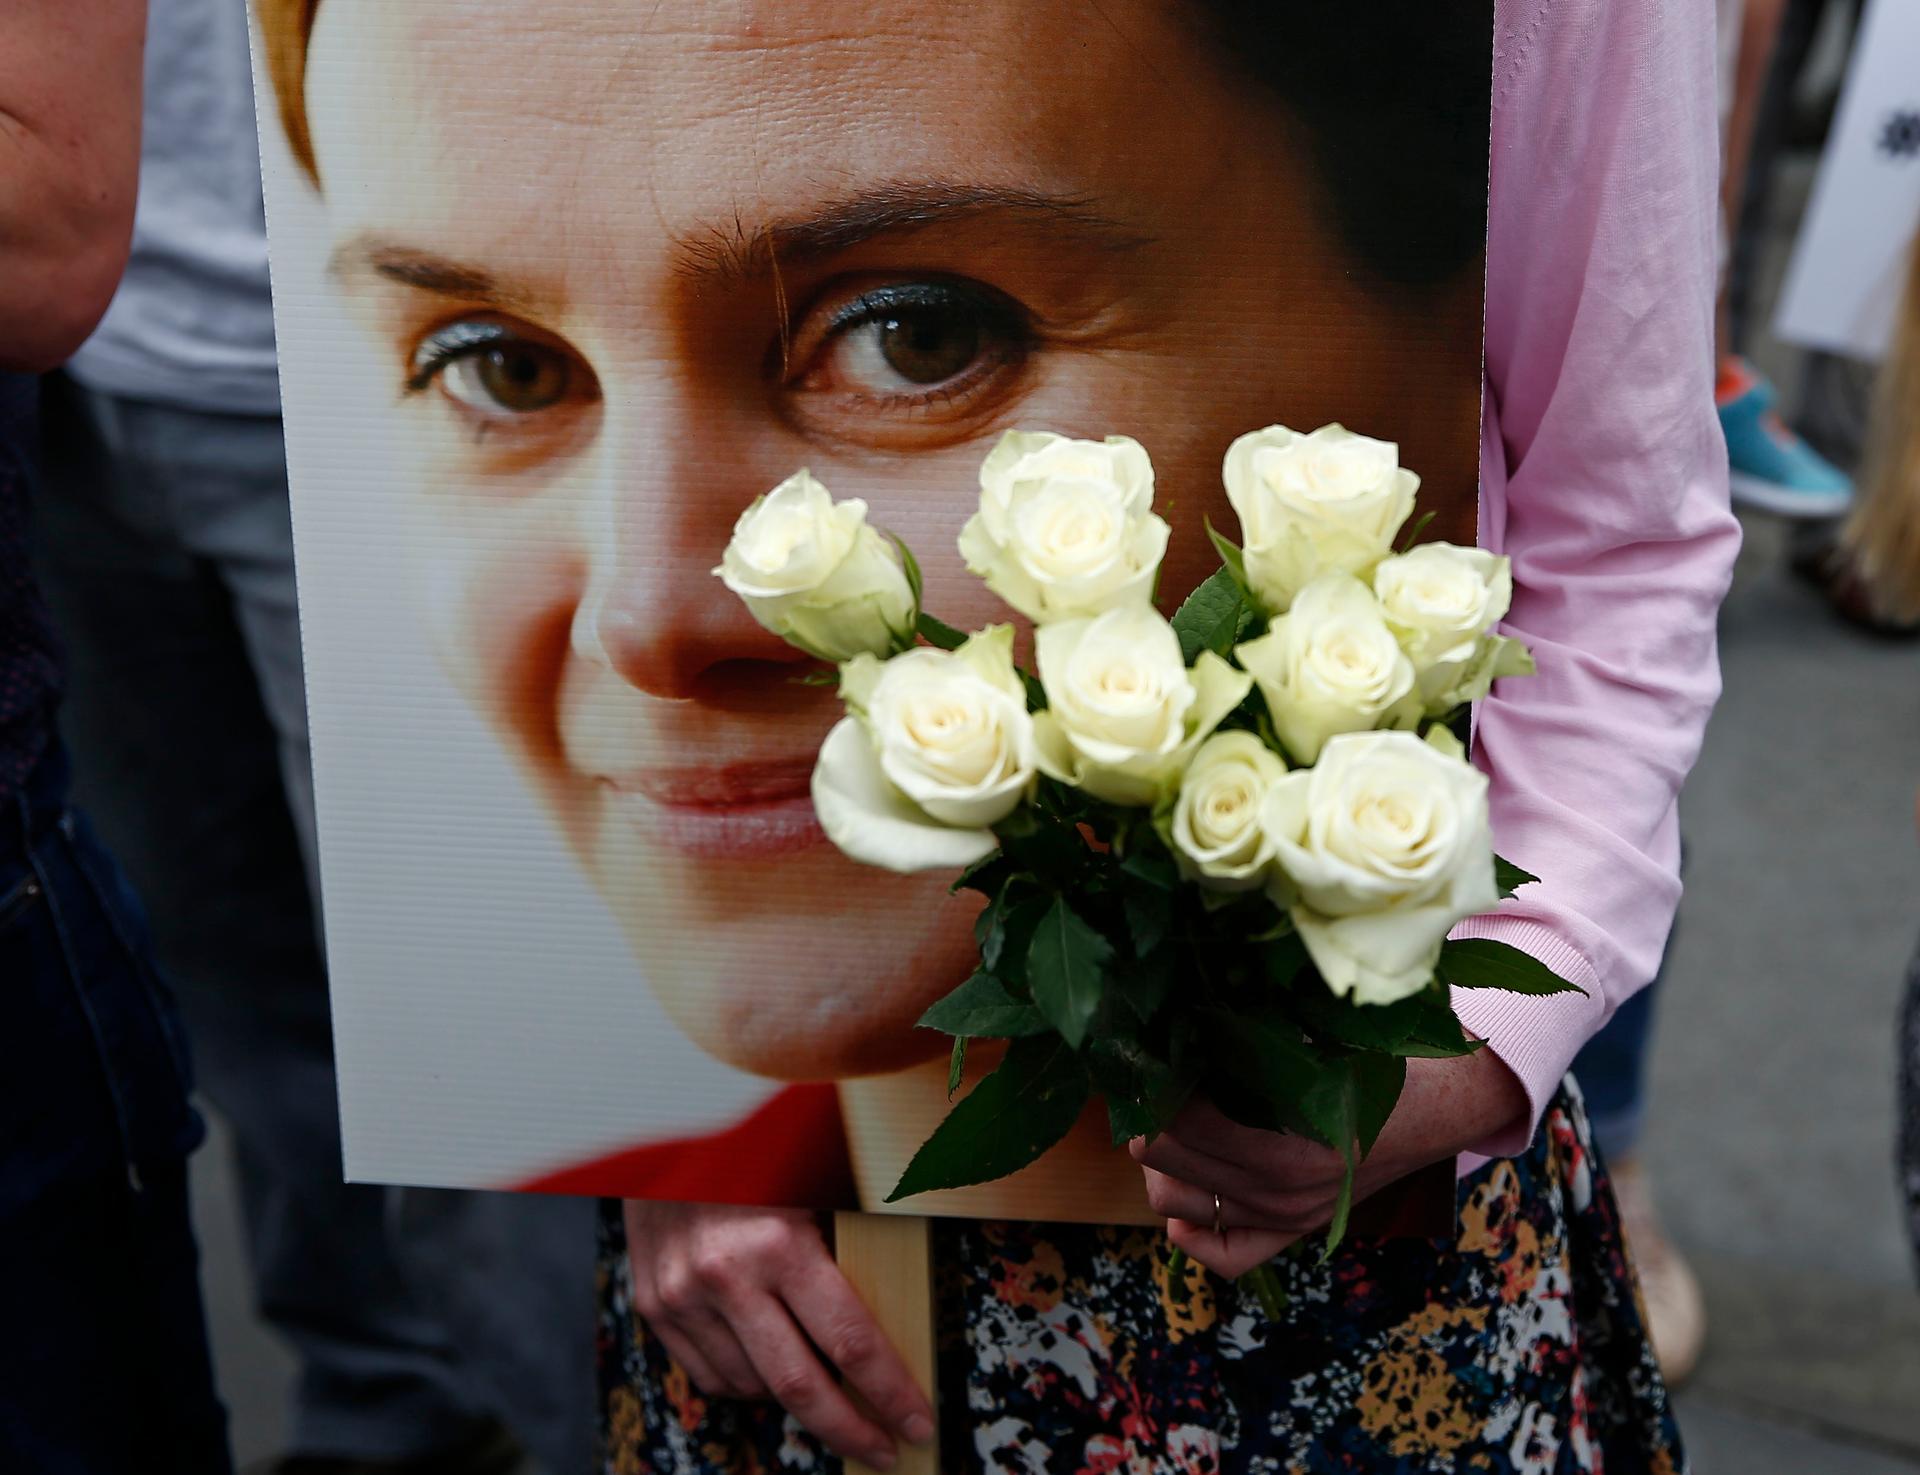 A woman holds a placard and white roses during a special service for murdered Labour Party MP Jo Cox, at Trafalgar Square in London, Britain June 22, 2016.